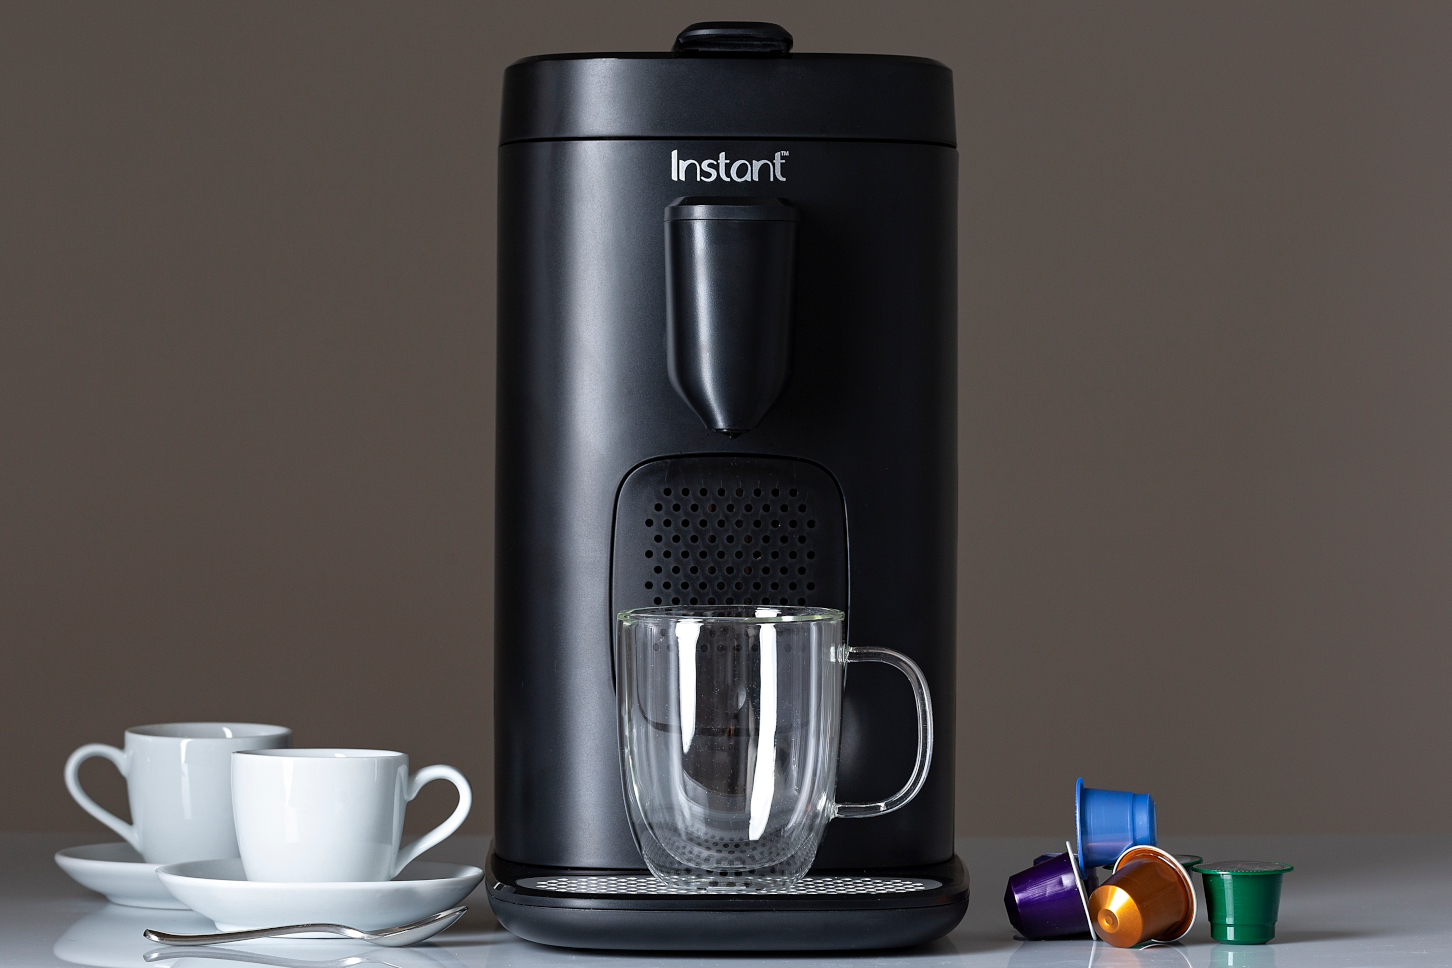 What is the Instant Pod 2-in-1 Espresso, K-Cup Pod and Ground